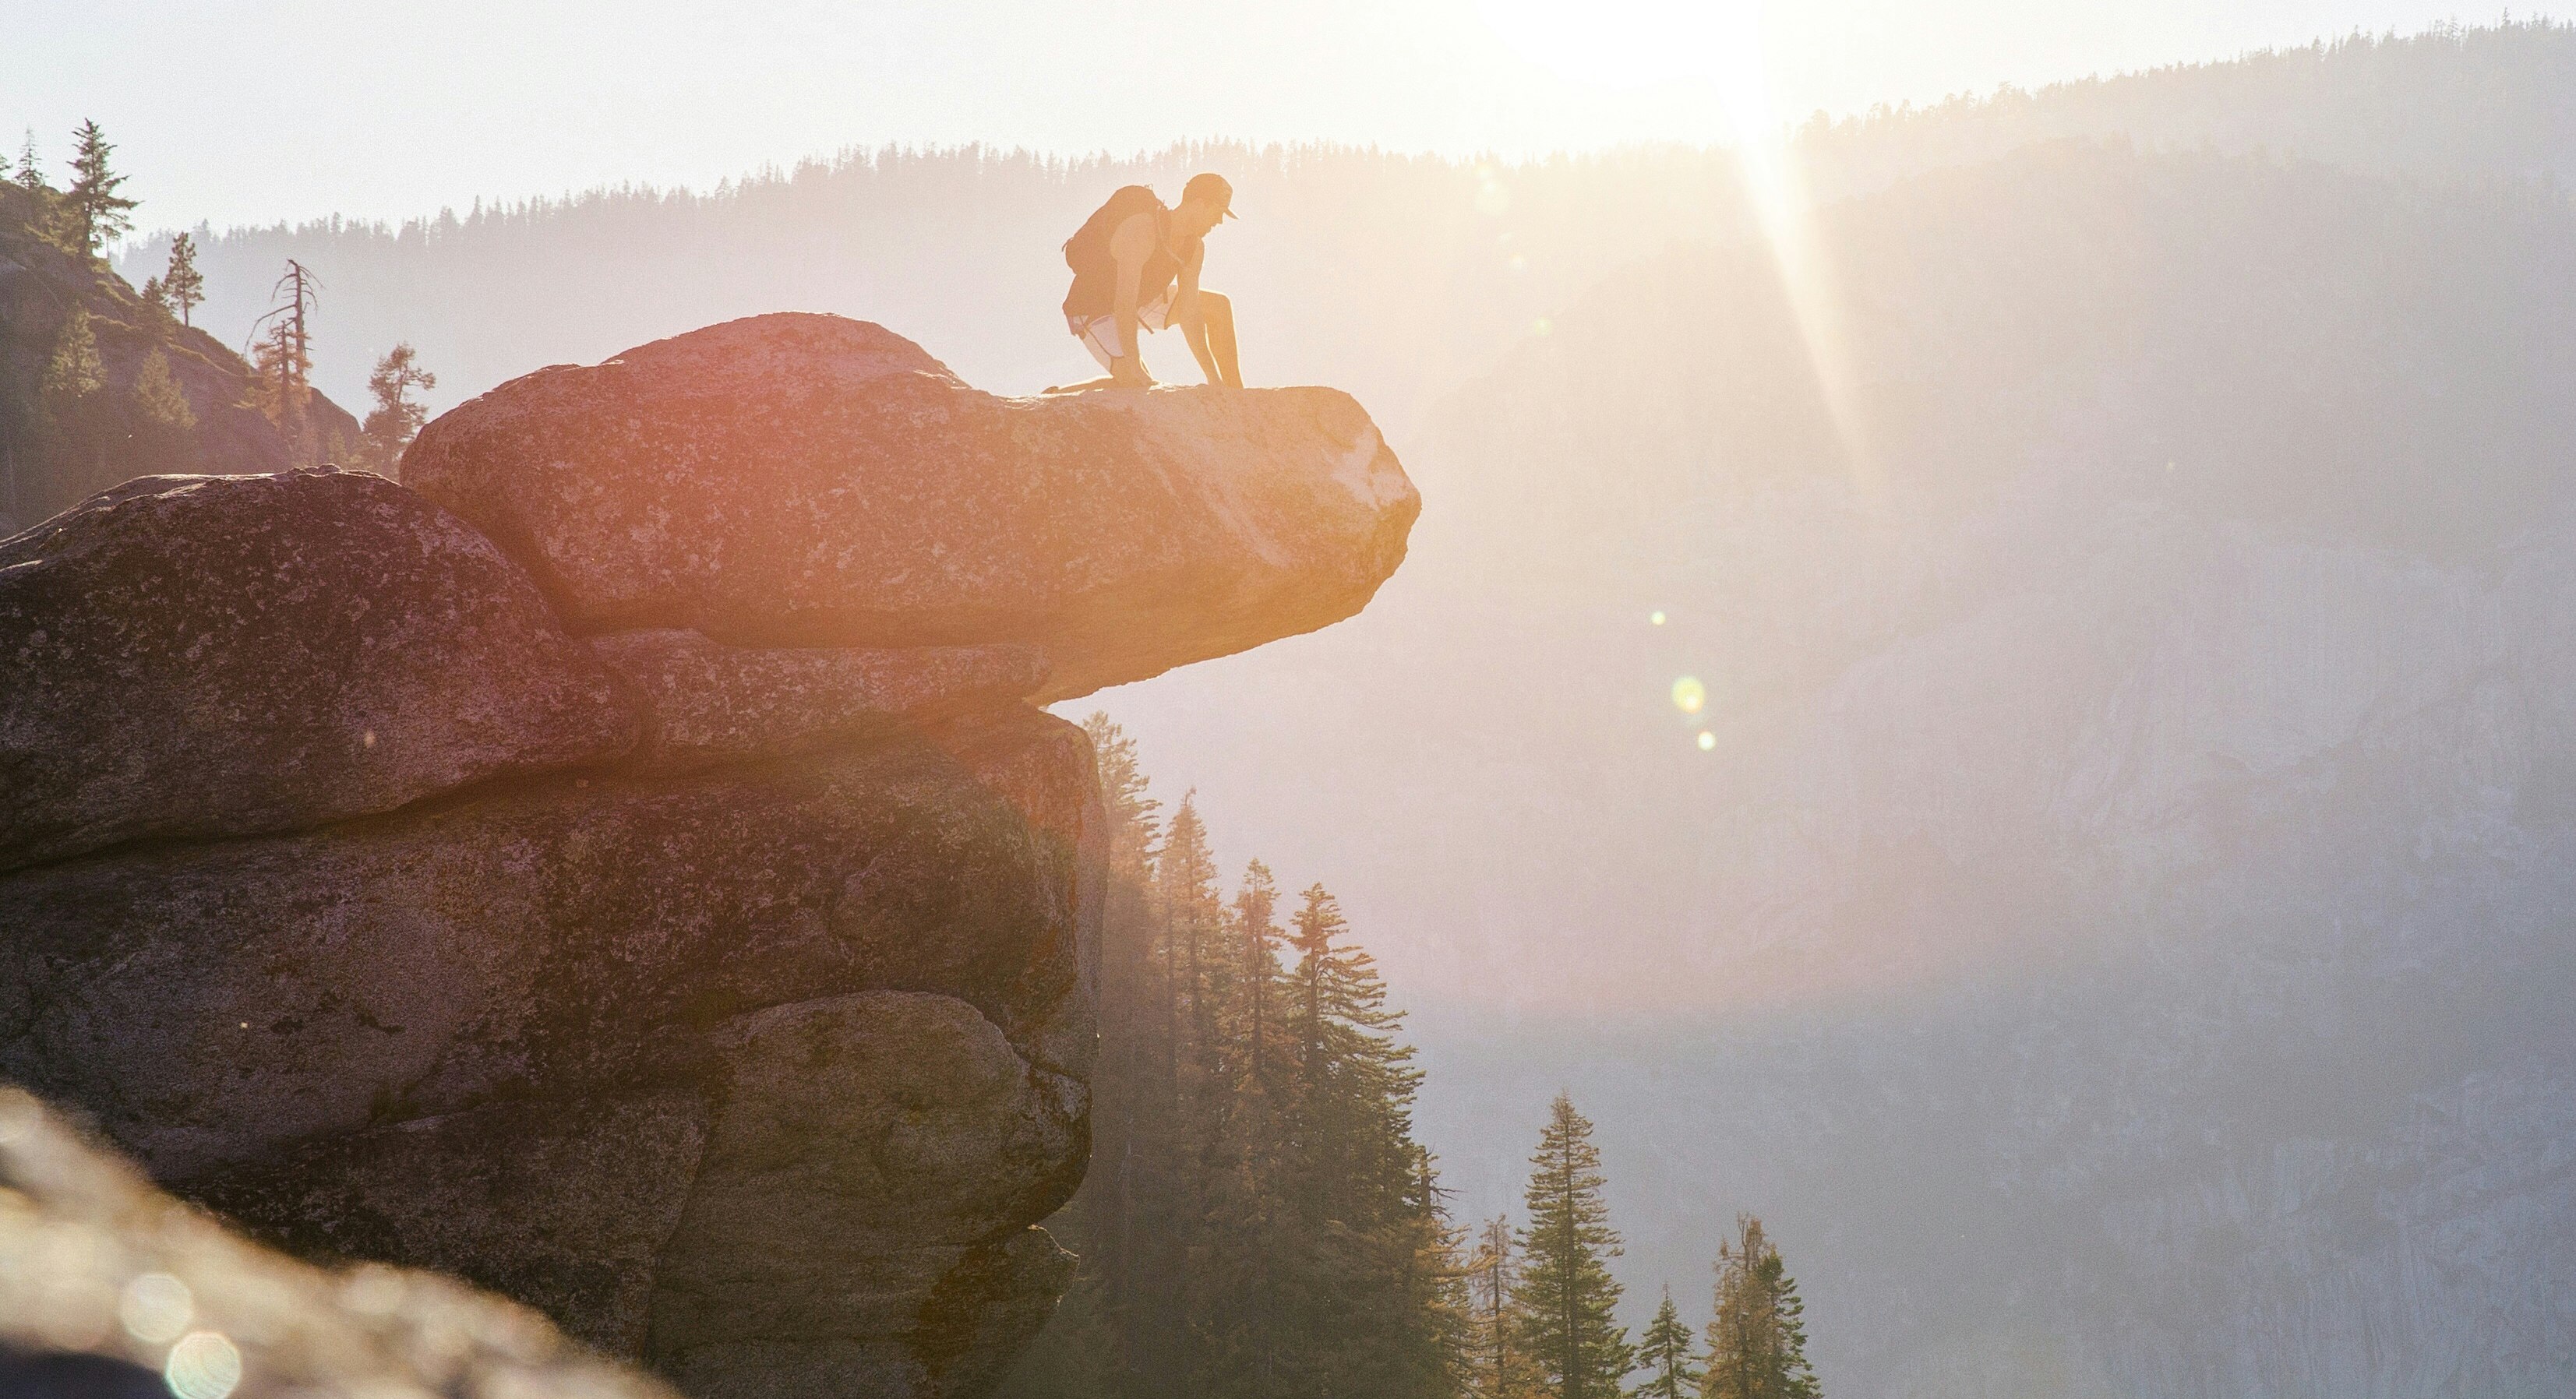 A person kneeling on the ledge of a rock with the sunset in the background at Glacier Point